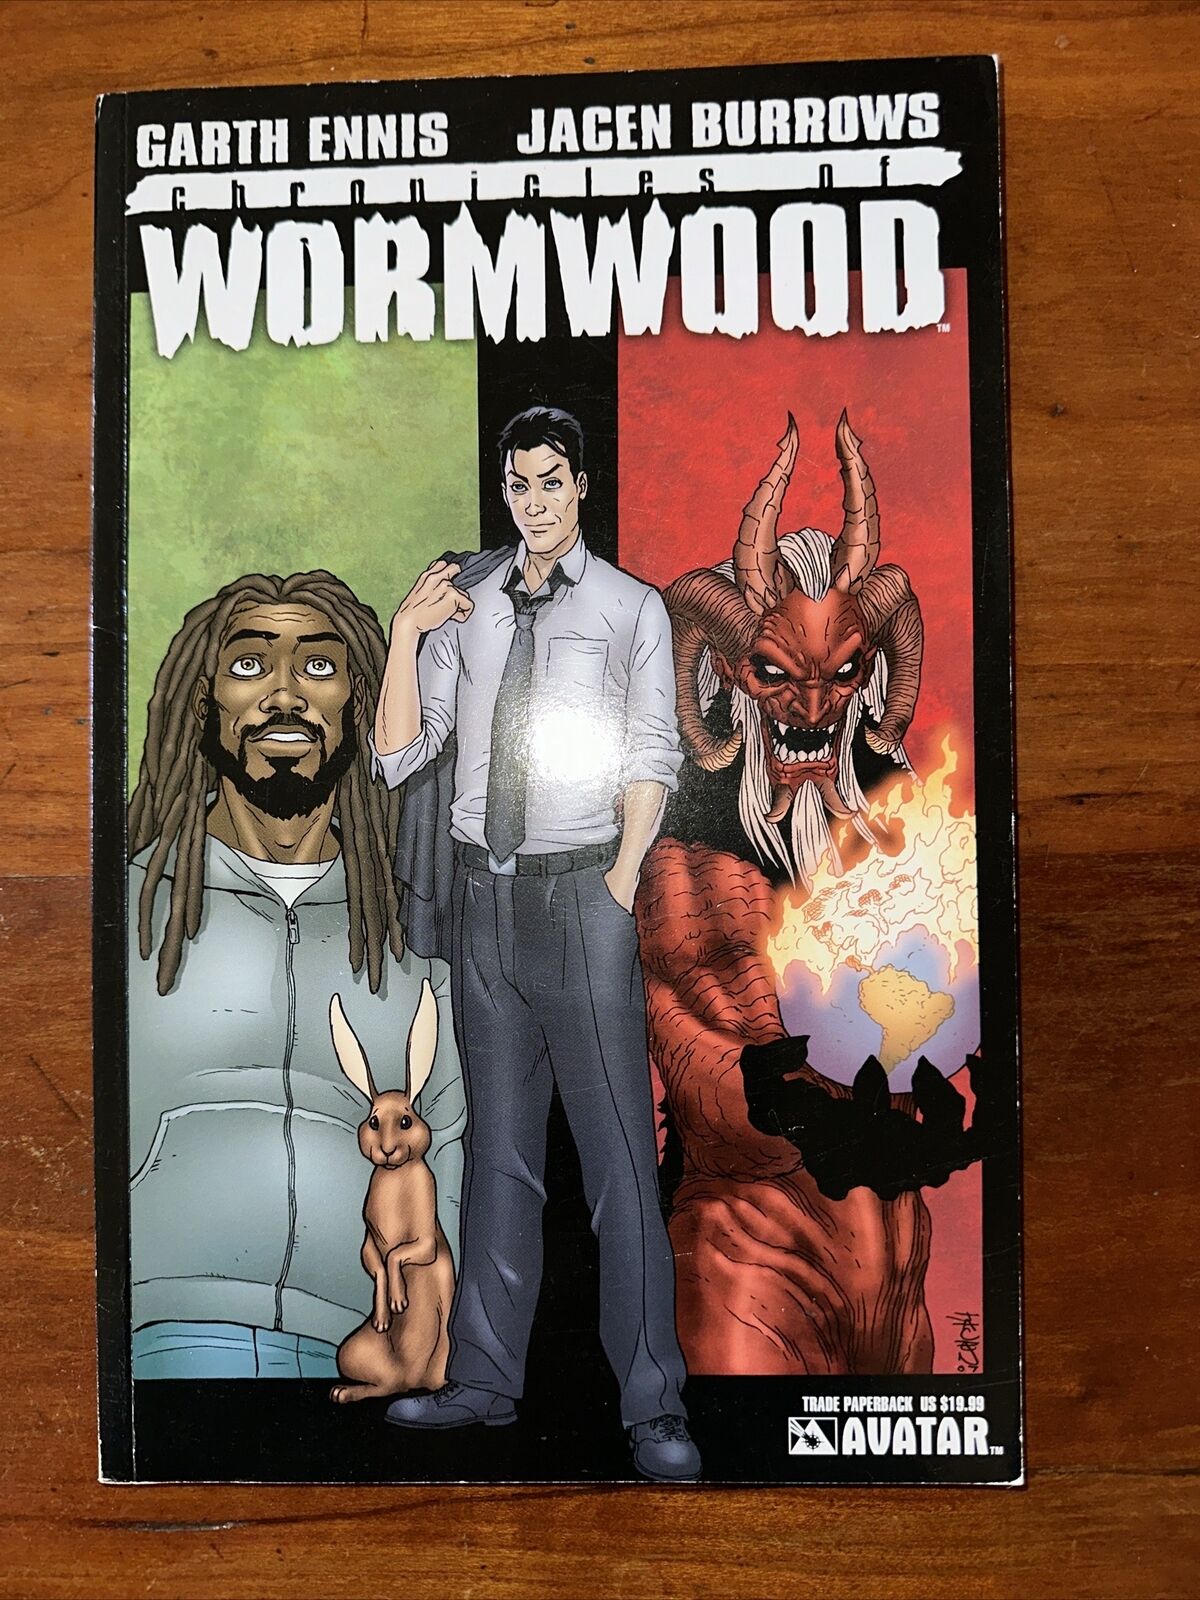 Chronicles of Wormwood Vol. 1 by Garth Ennis (2007, Avatar, Trade Paperback) New